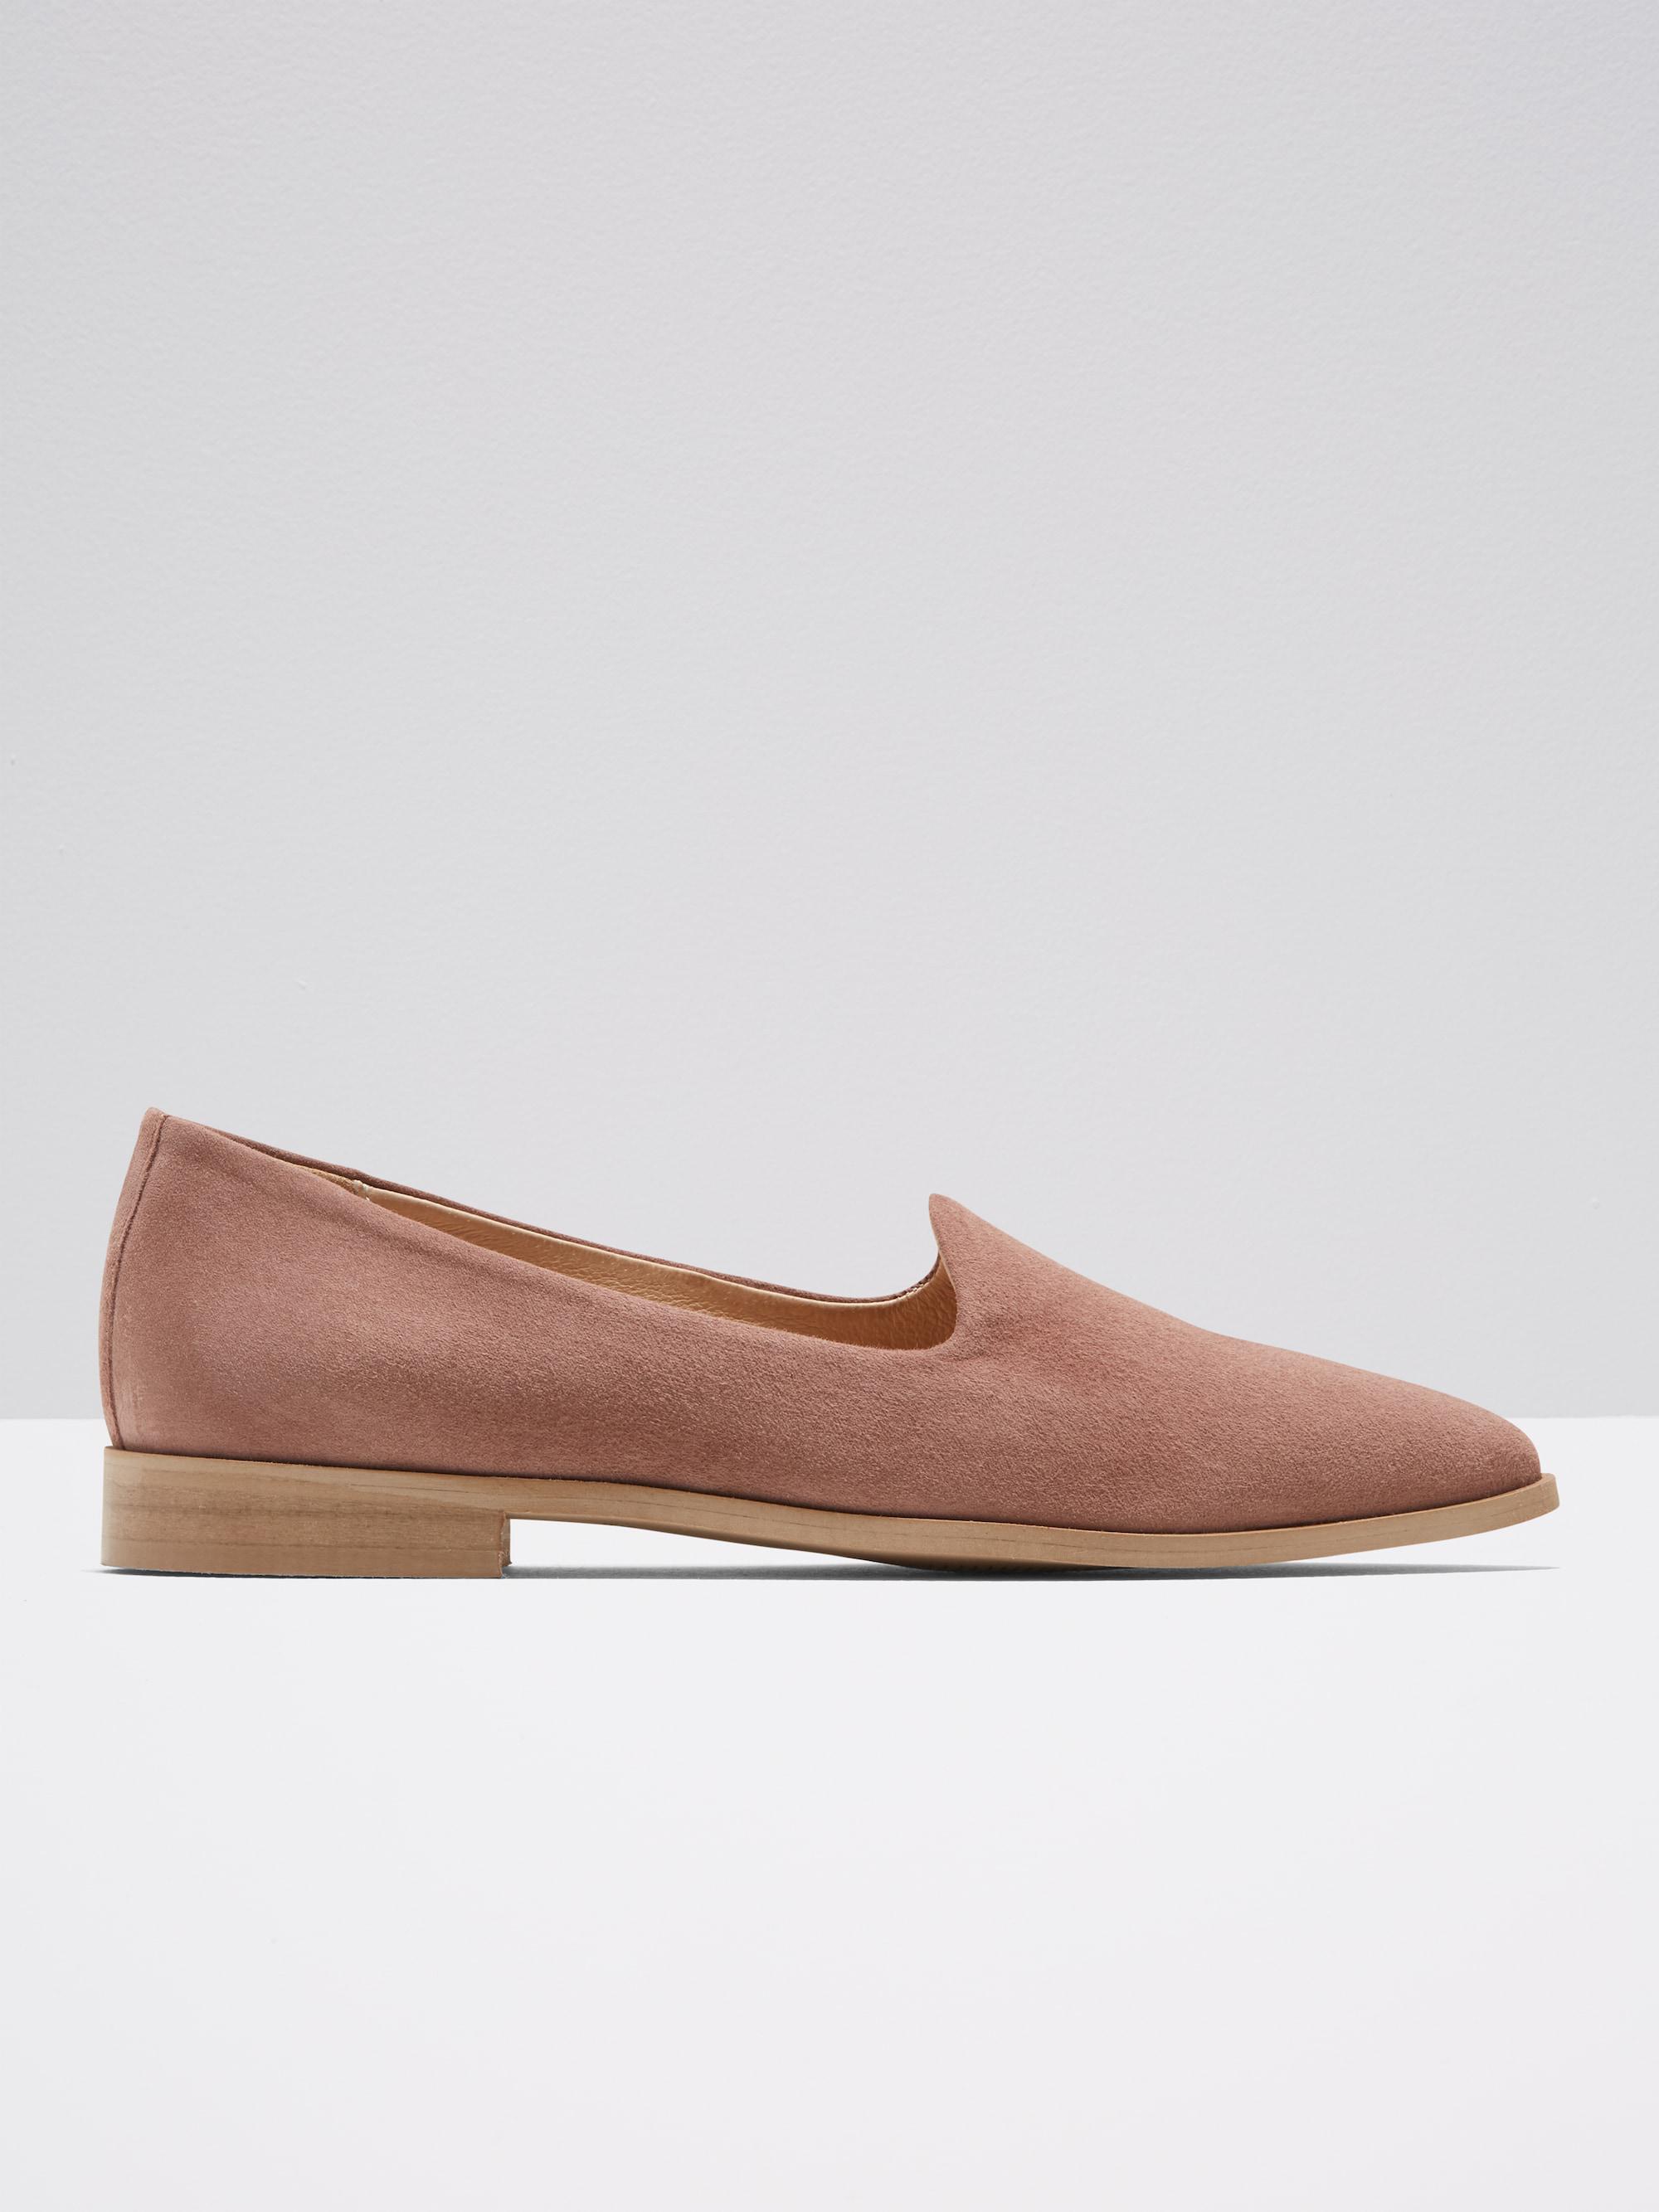 dusty pink loafers